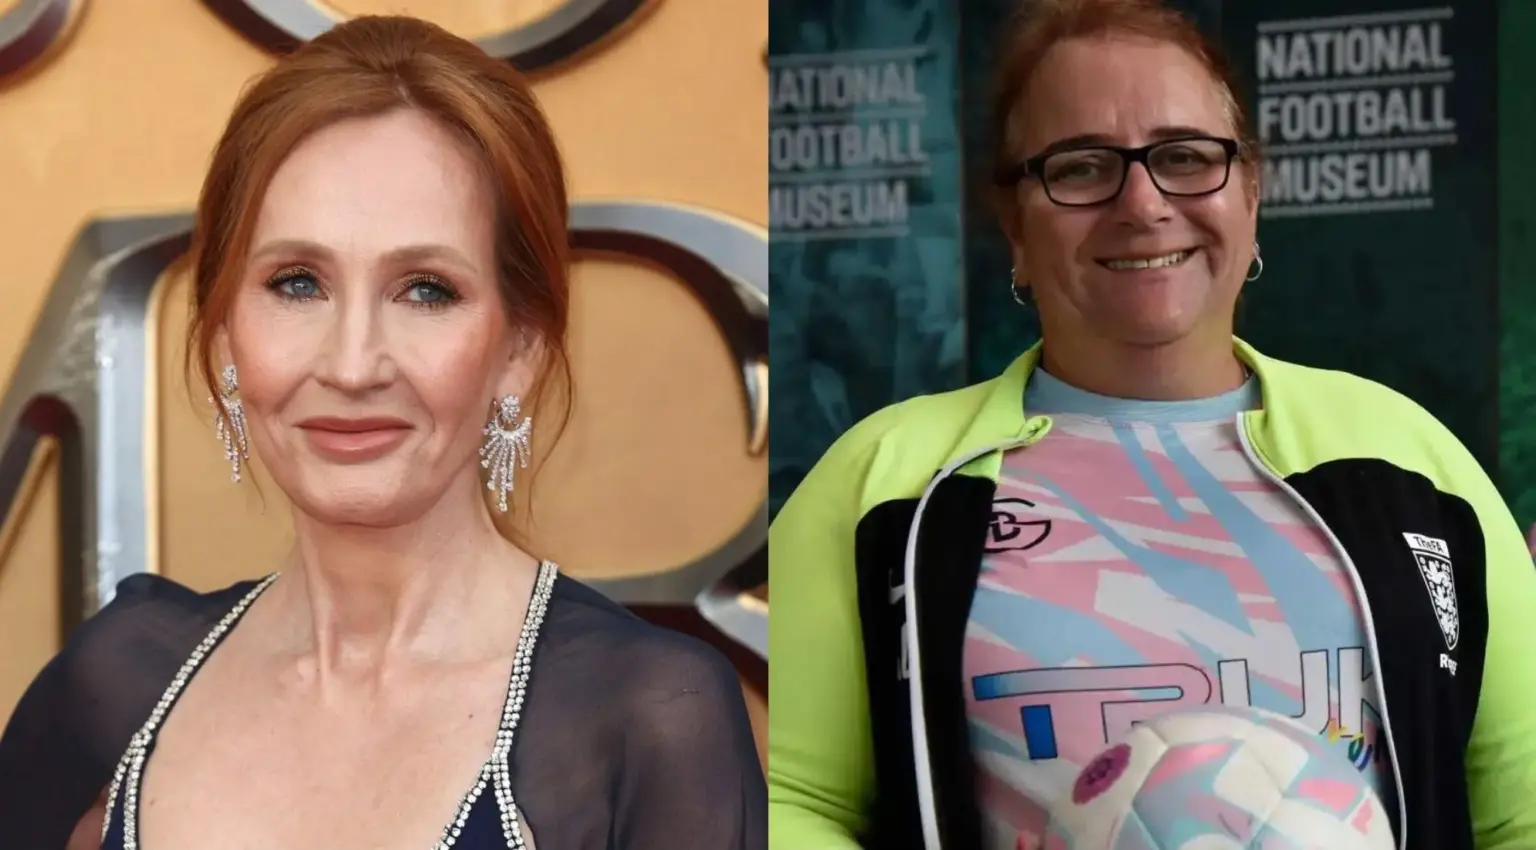 "Trans leader Lucy Clark boldly reacts to JK Rowling"